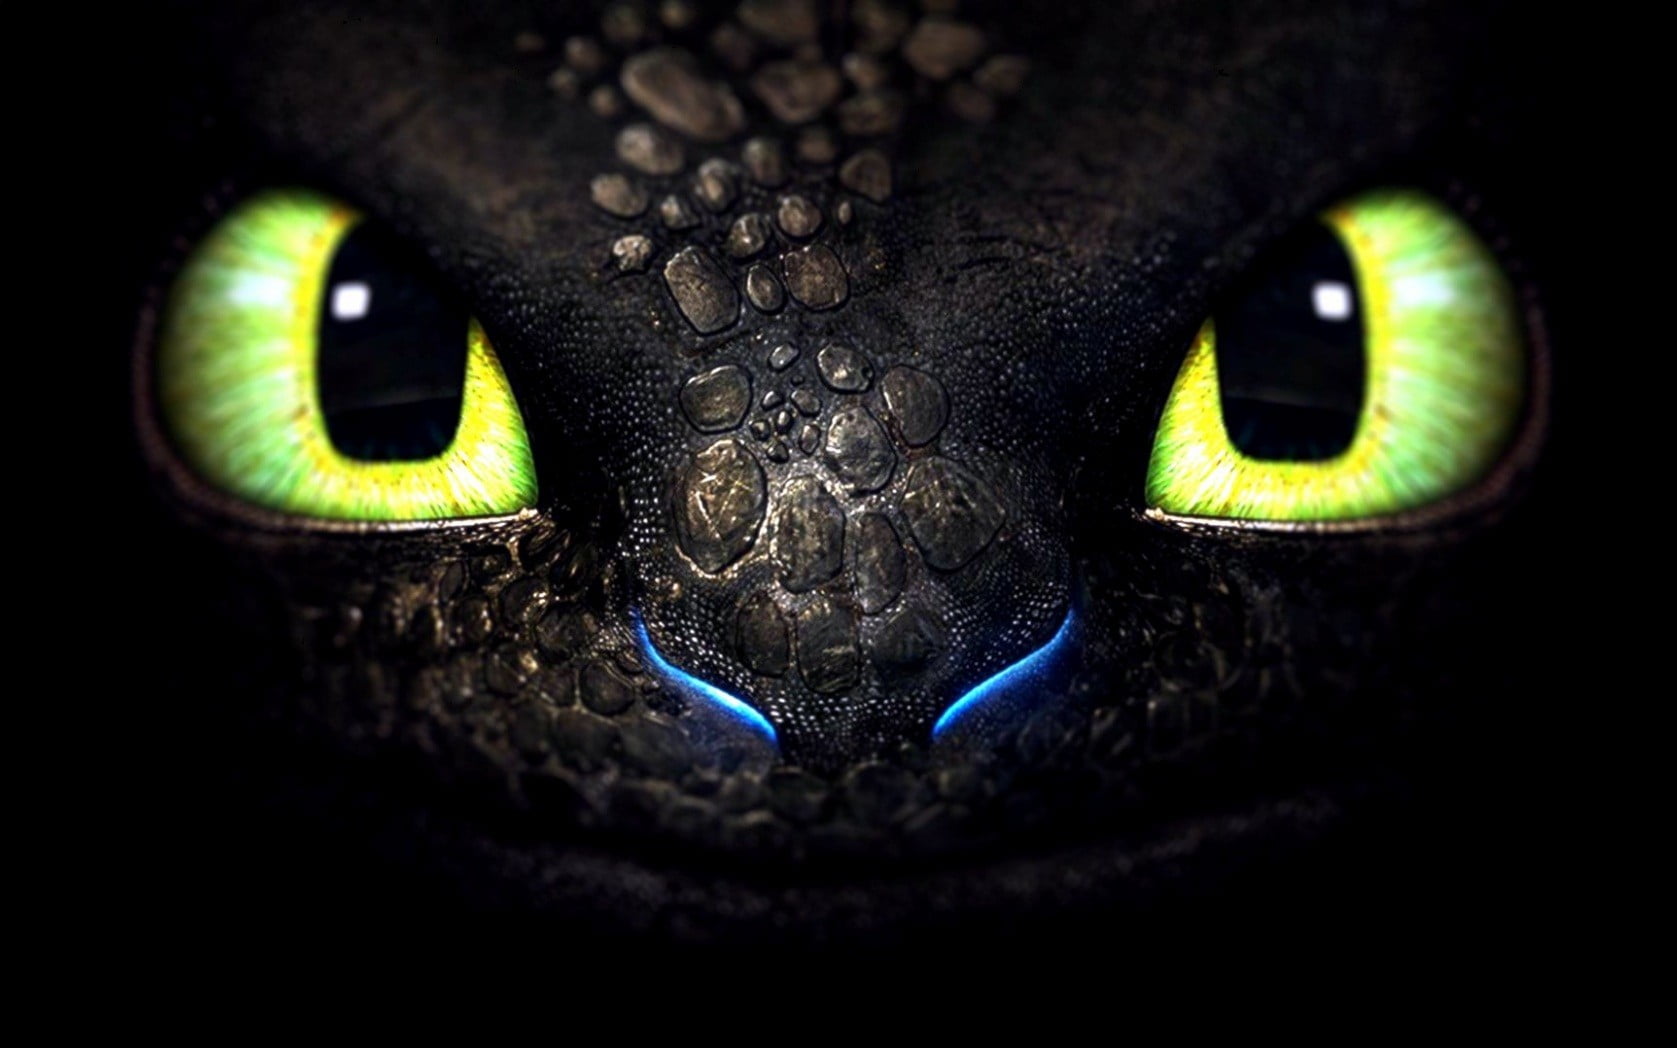 How to train your dragon Toothless digital wallpaper, animal